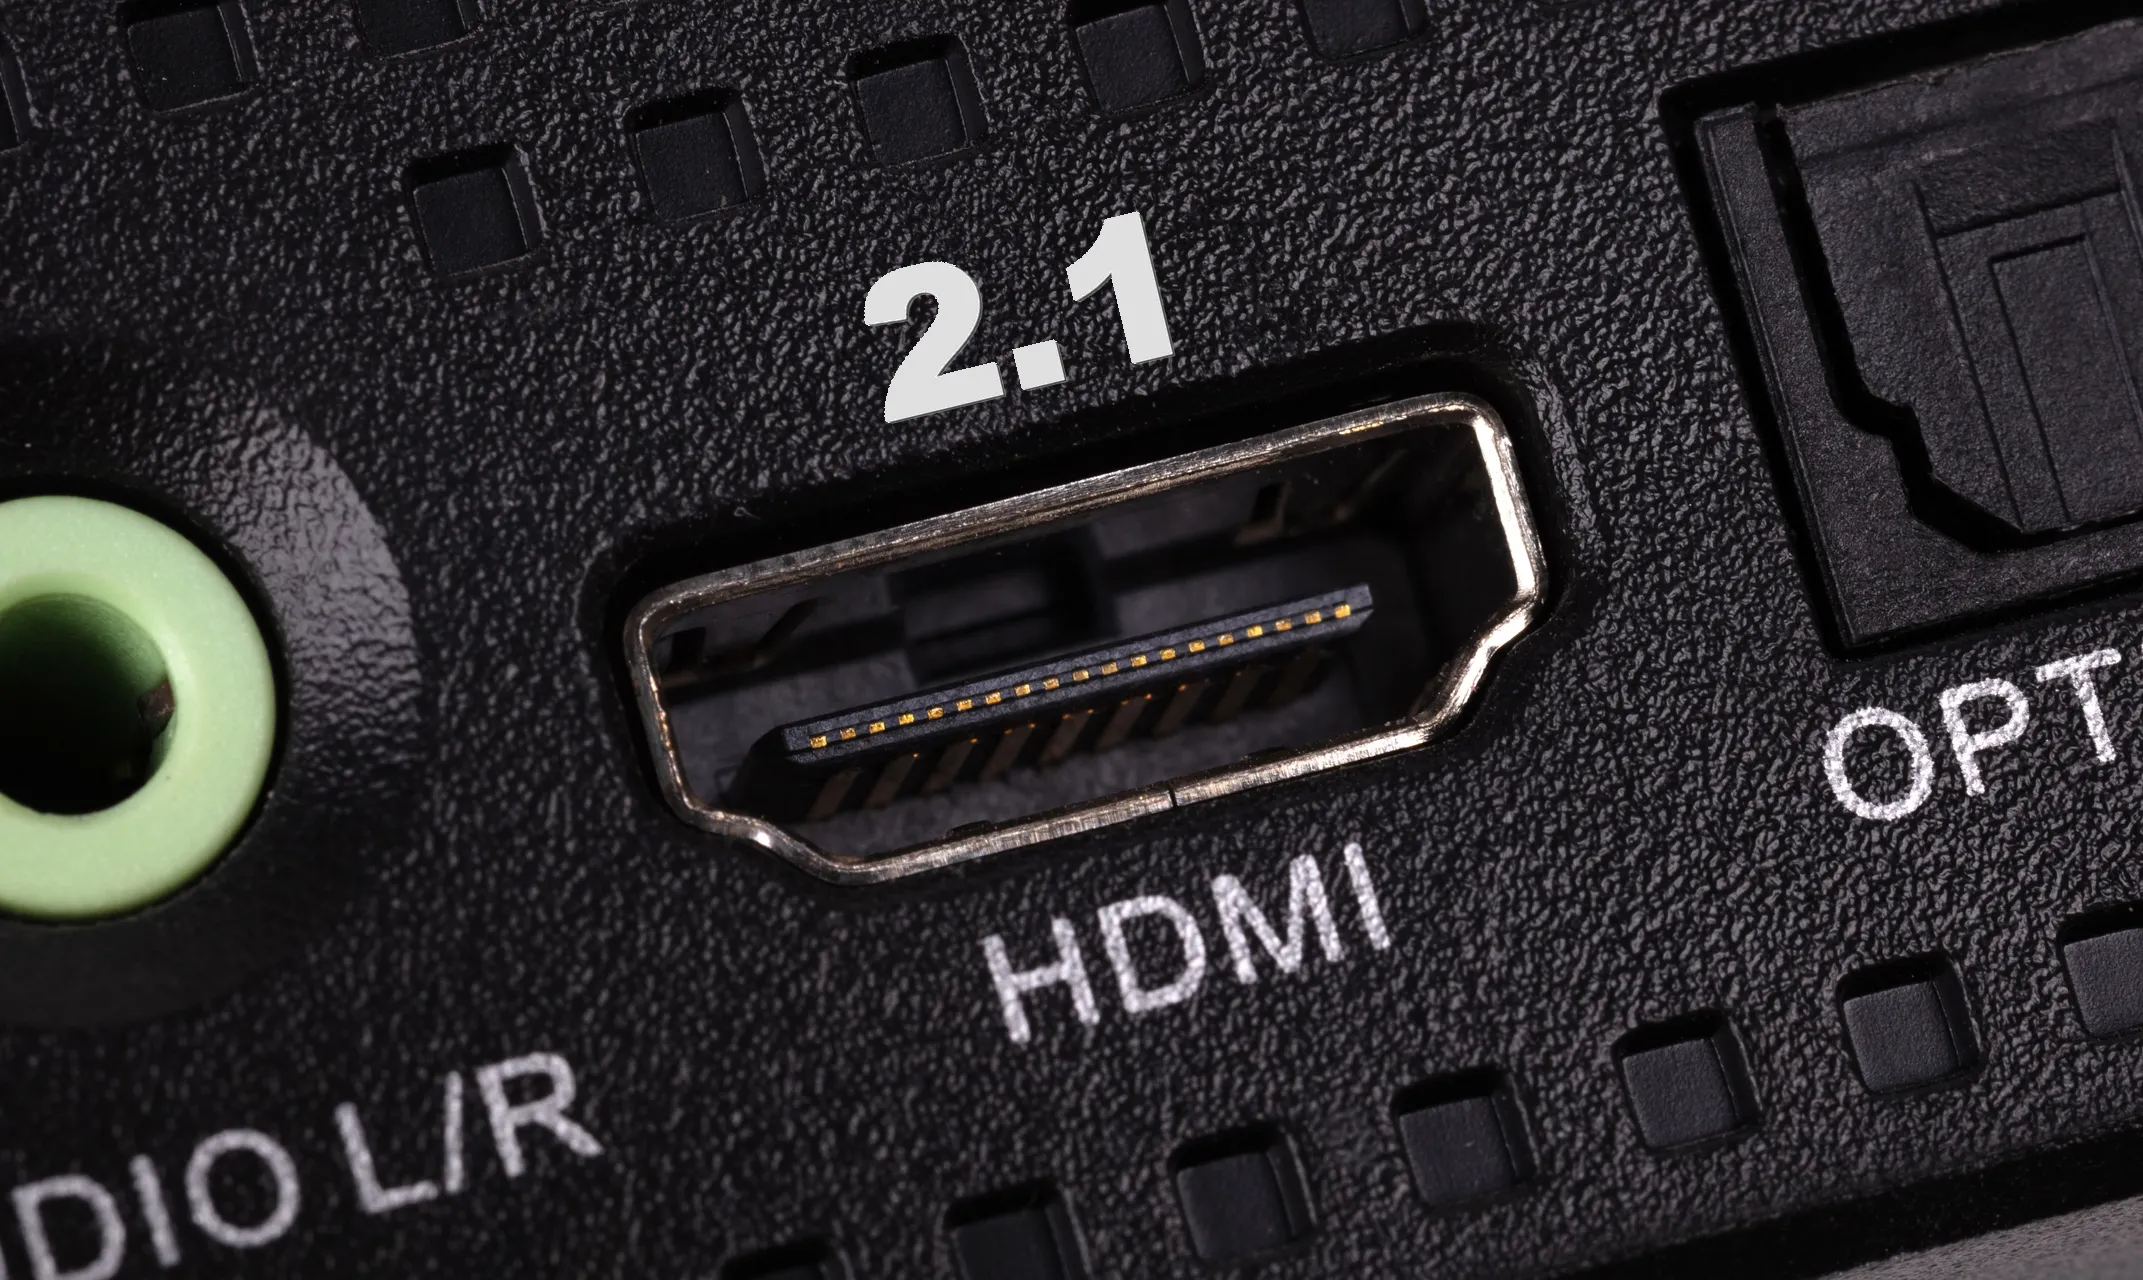 What is HDMI cable?